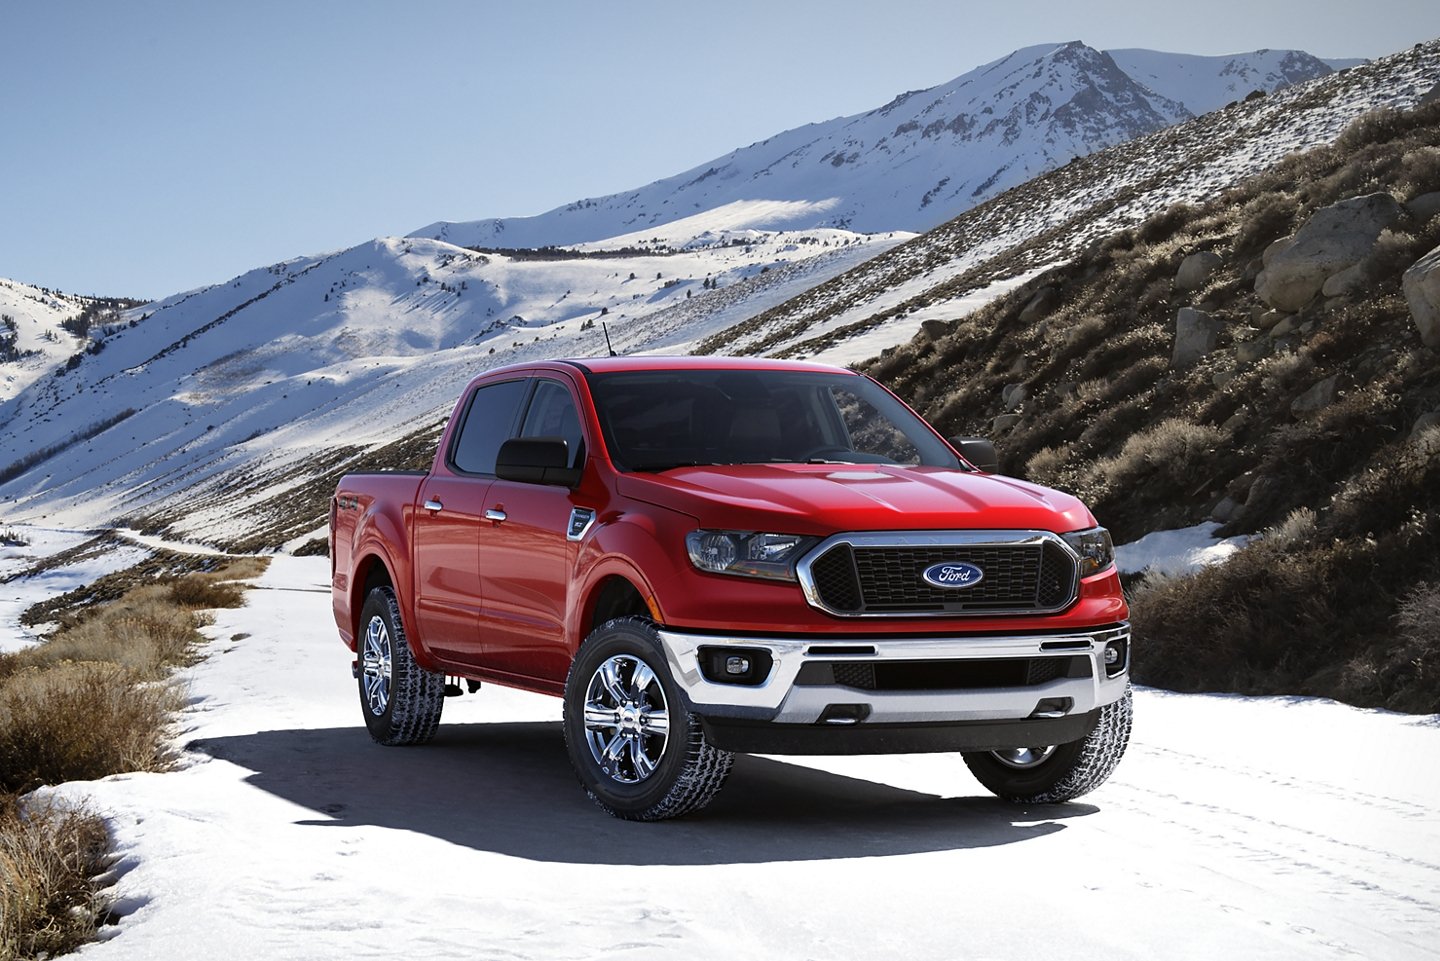 Report: The Ford Ranger is the Most "Made in America" Vehicle - Autoversed